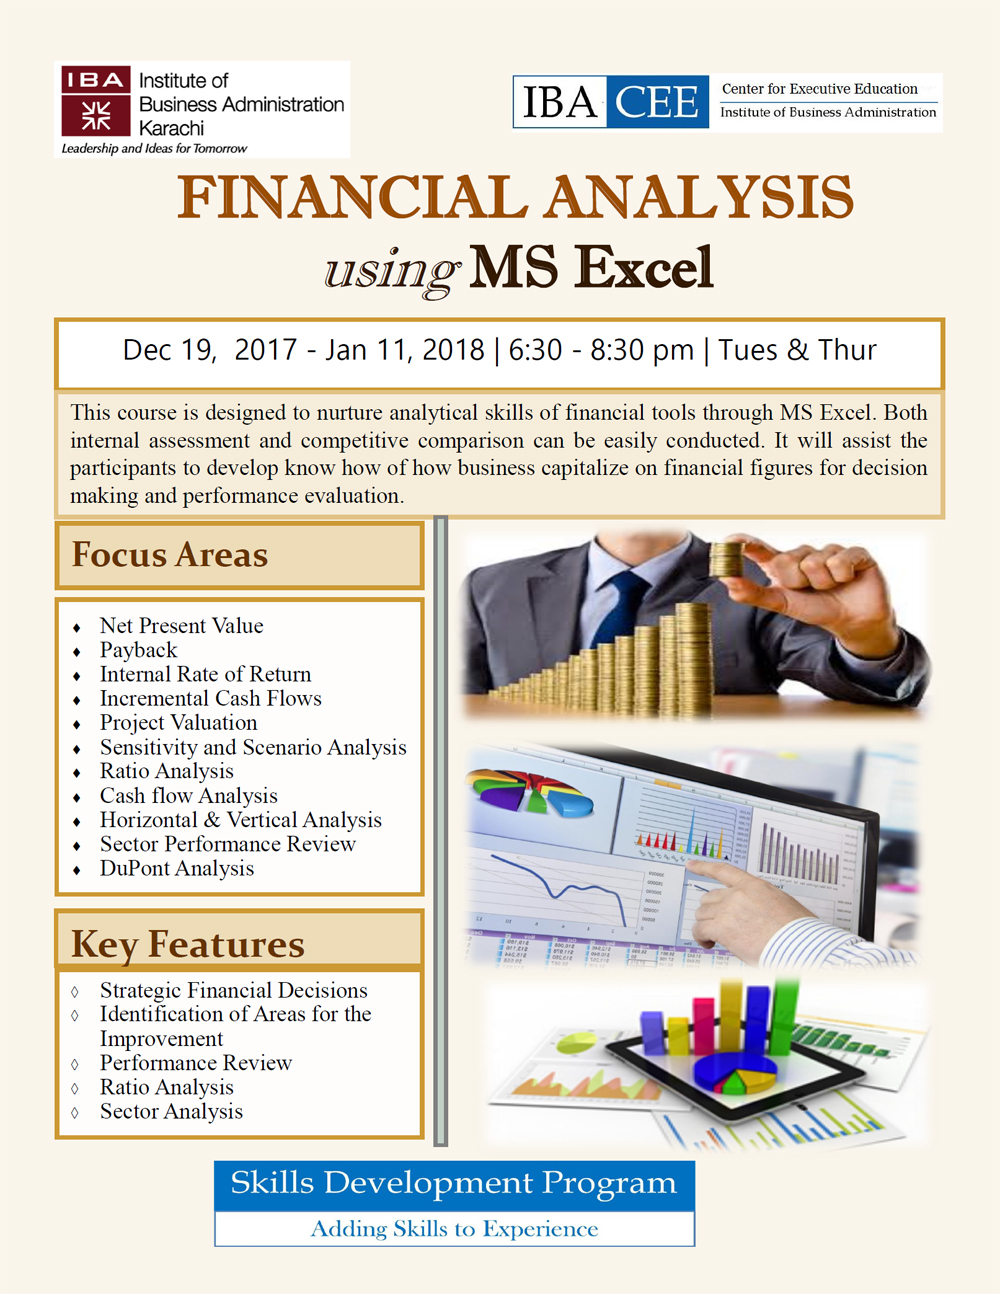 Financial Analysis using MS Excel